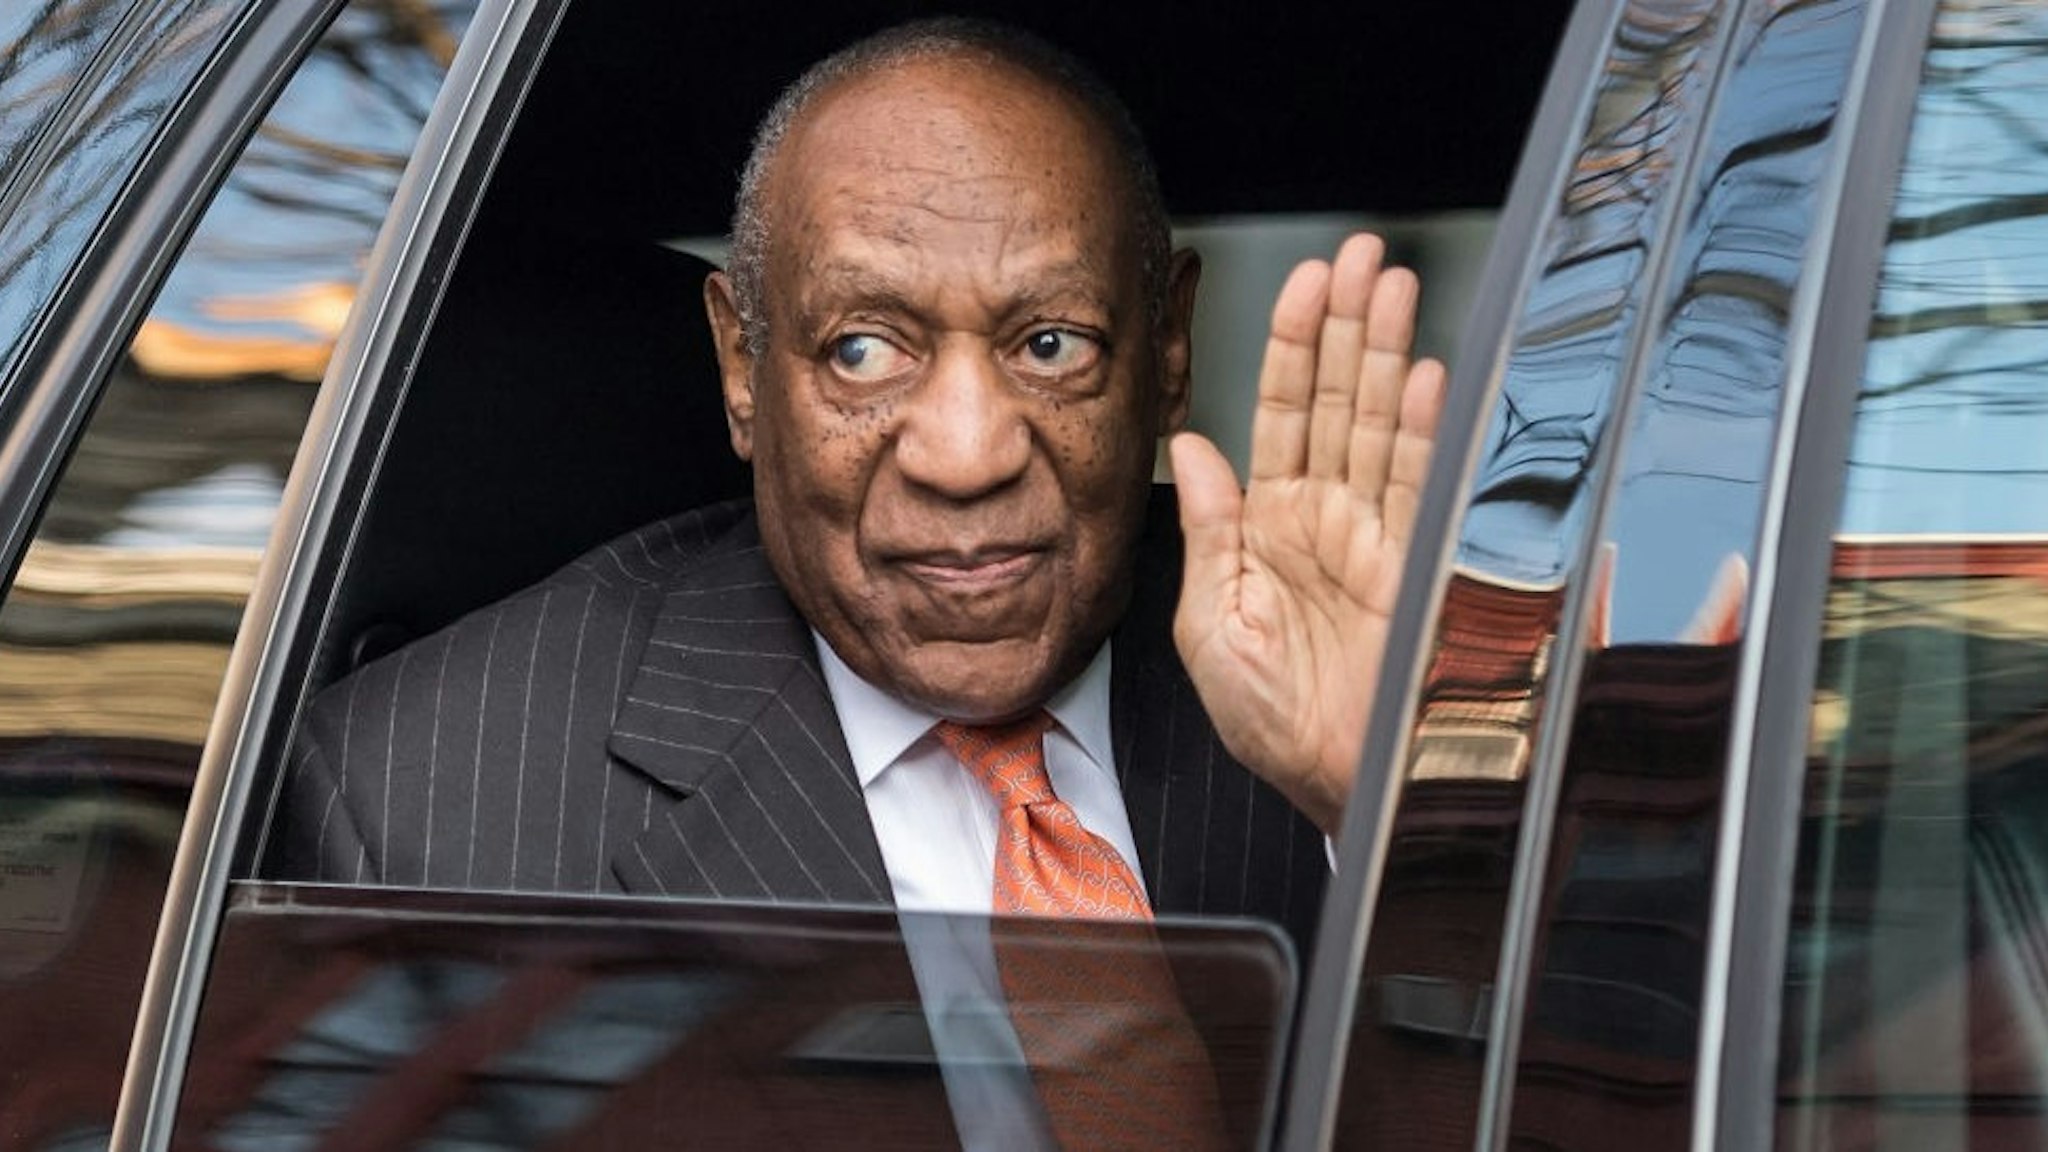 NORRISTOWN, PA - APRIL 10: Actor/ stand-up comedian Bill Cosby leaving the Montgomery County Courthouse after the second day of his retrial for sexual assault charges on April 10, 2018 in Norristown, Pennsylvania. A former Temple University employee alleges that the entertainer drugged and molested her in 2004 at his home in suburban Philadelphia. More than 40 women have accused the 80 year old entertainer of sexual assault.